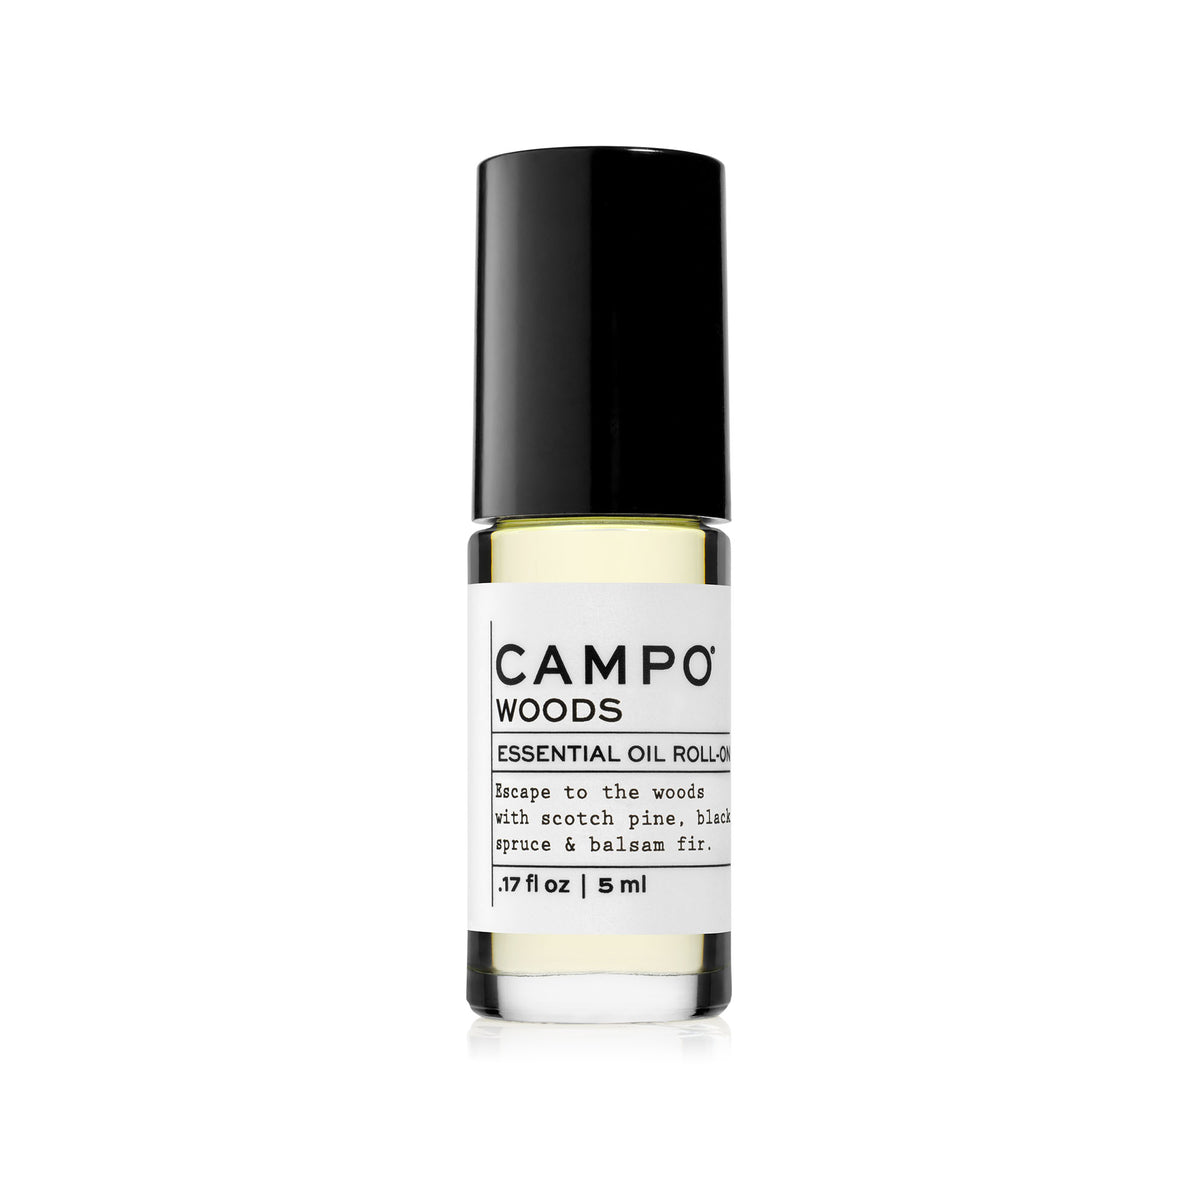 Campo Beauty Essential Oil SLEEP Blend Roll-On that in 5 ml. Soothe sore muscles and pain. Inspired by a walk in the woods. Enjoy this 100% pure essential oil blend of Pine Scotch, Siberian Fir, Balsam Fir, Black Spruce, and Bergamot.